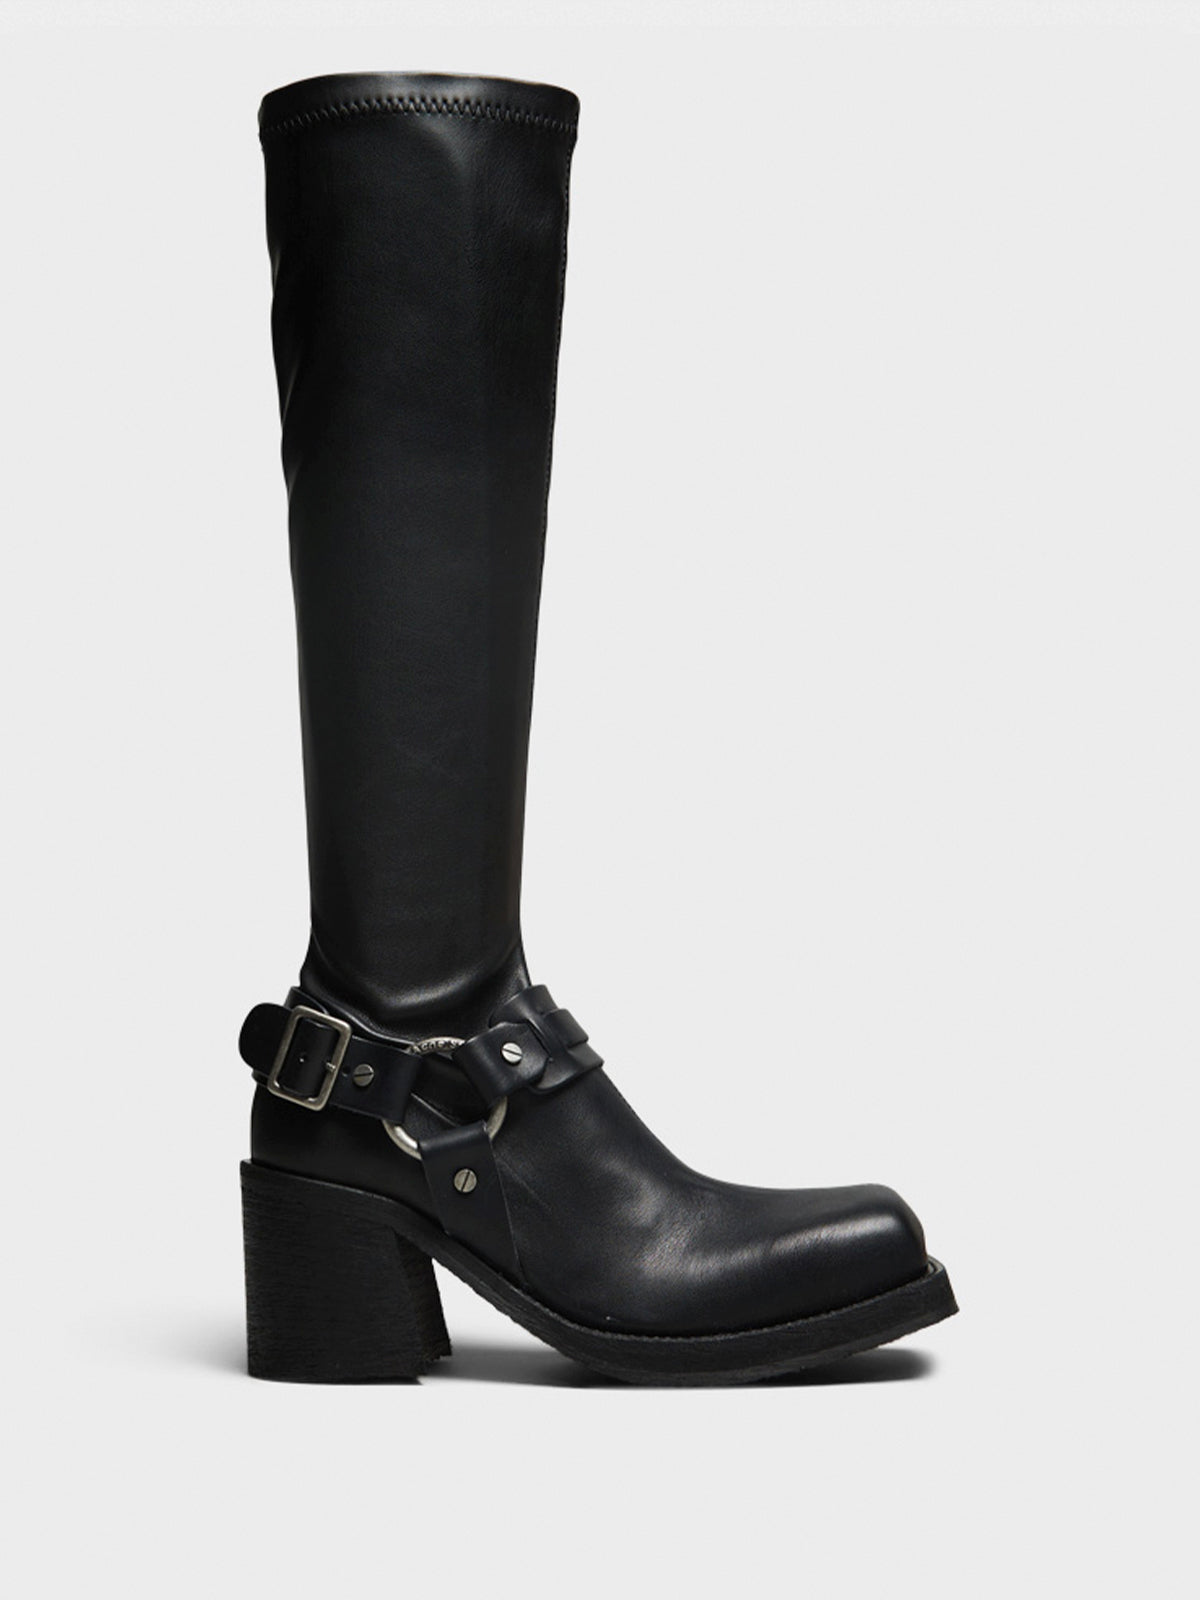 Pull-on Buckle Boots in Black